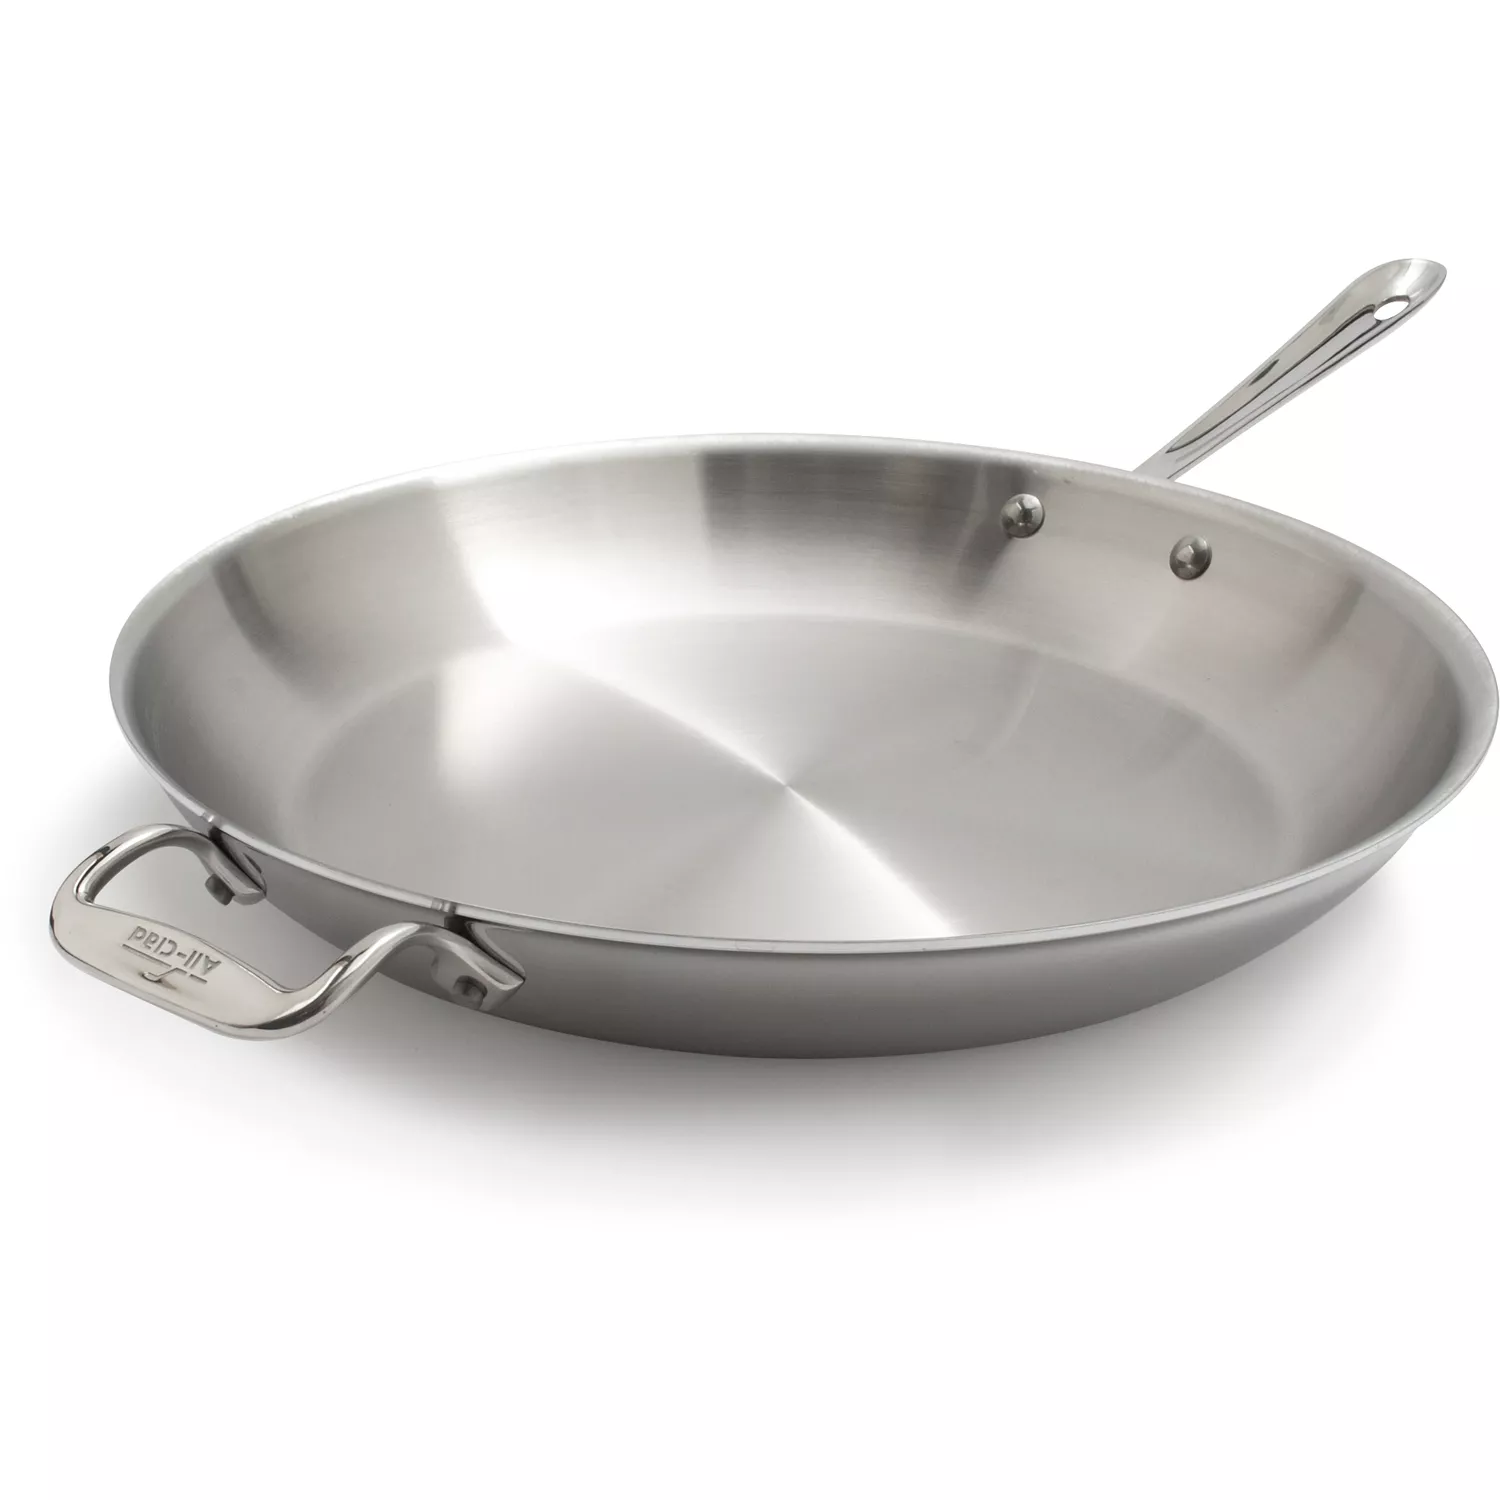 All-Clad D3 Stainless Steel Skillet